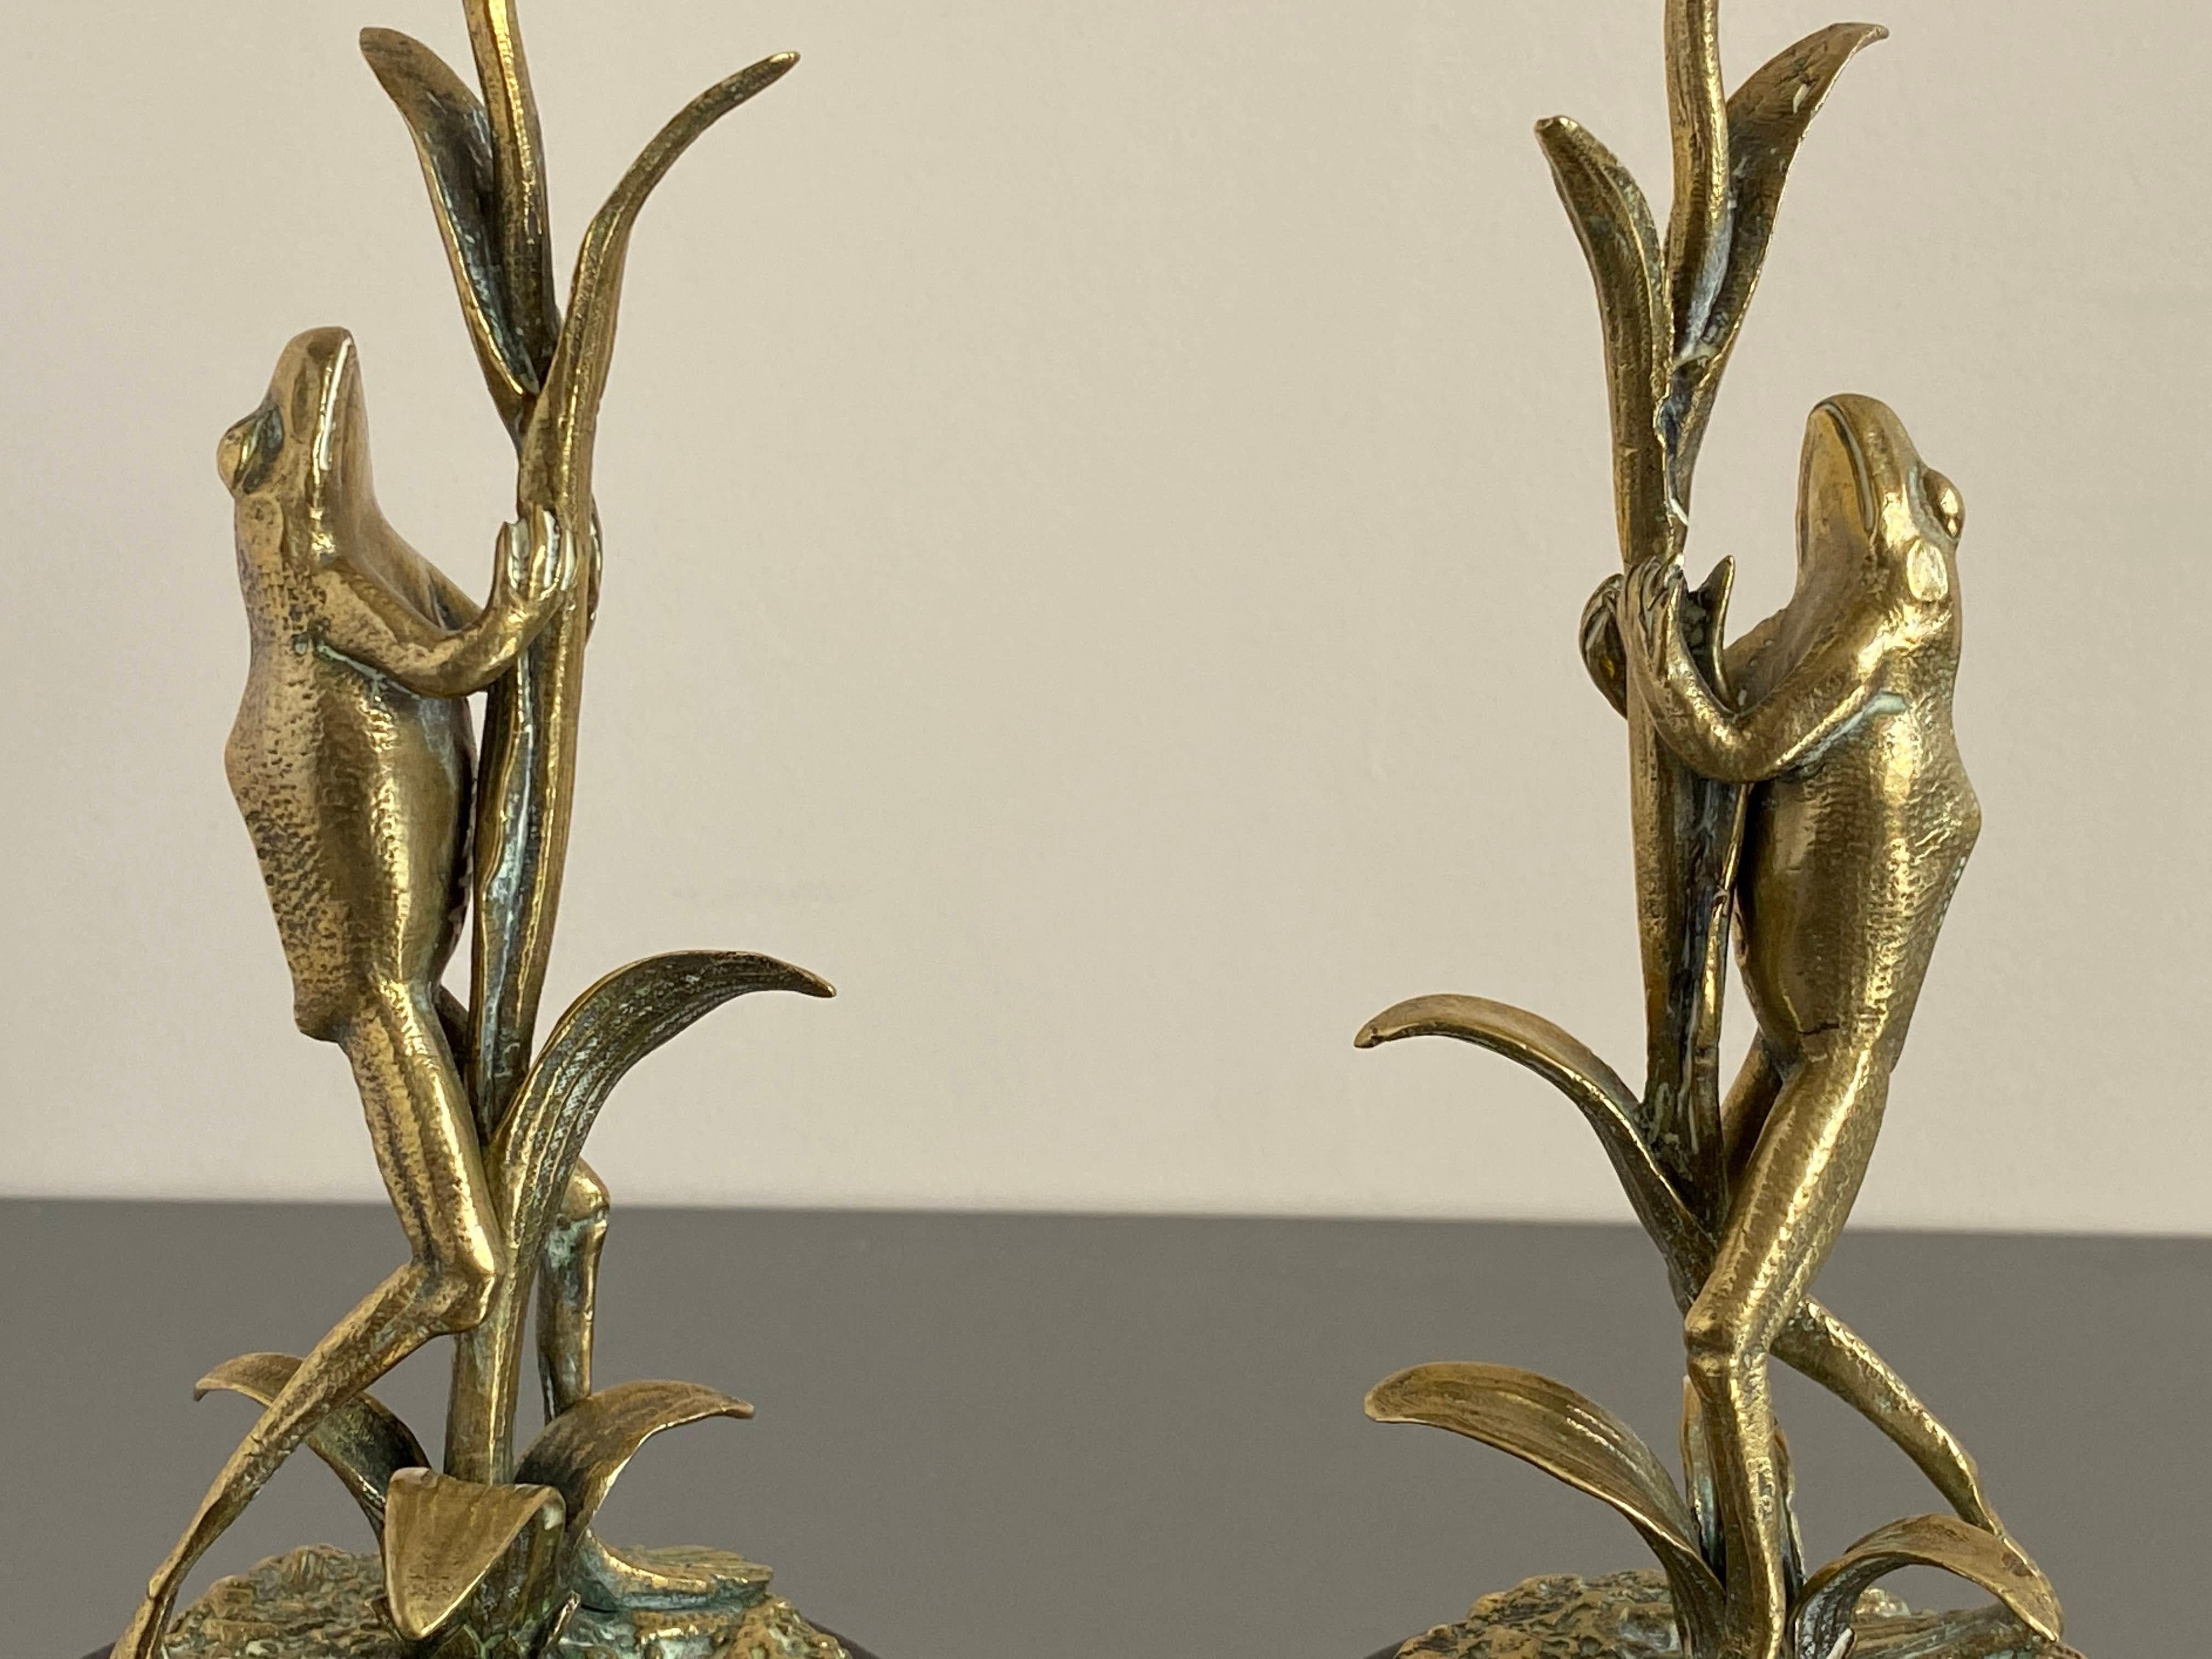 19th Century Art Nouveau Pair of Brass Candle Sticks Modelled as Frogs Climbing Lotus Flowers